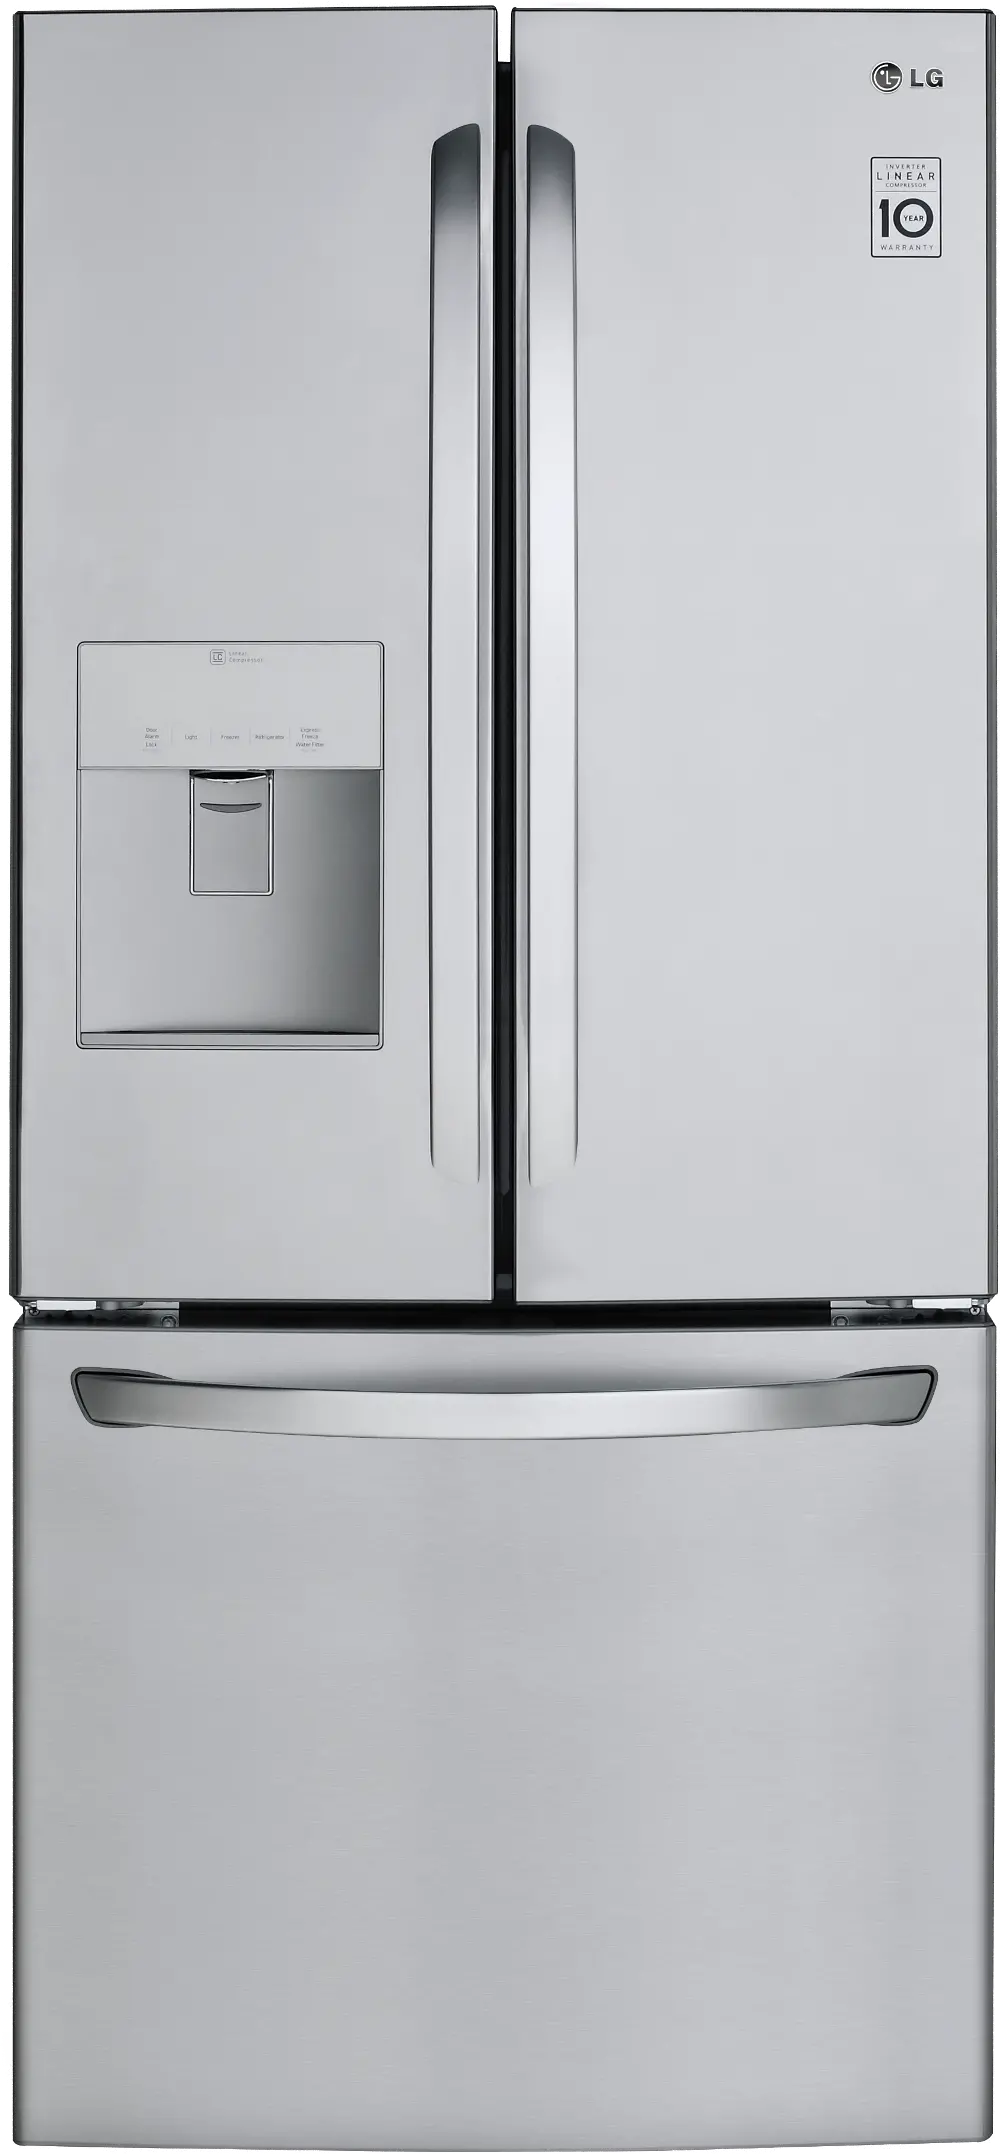 LFDS22520S LG 21.8 cu ft French Door Refrigerator - 30 W Stainless Steel-1